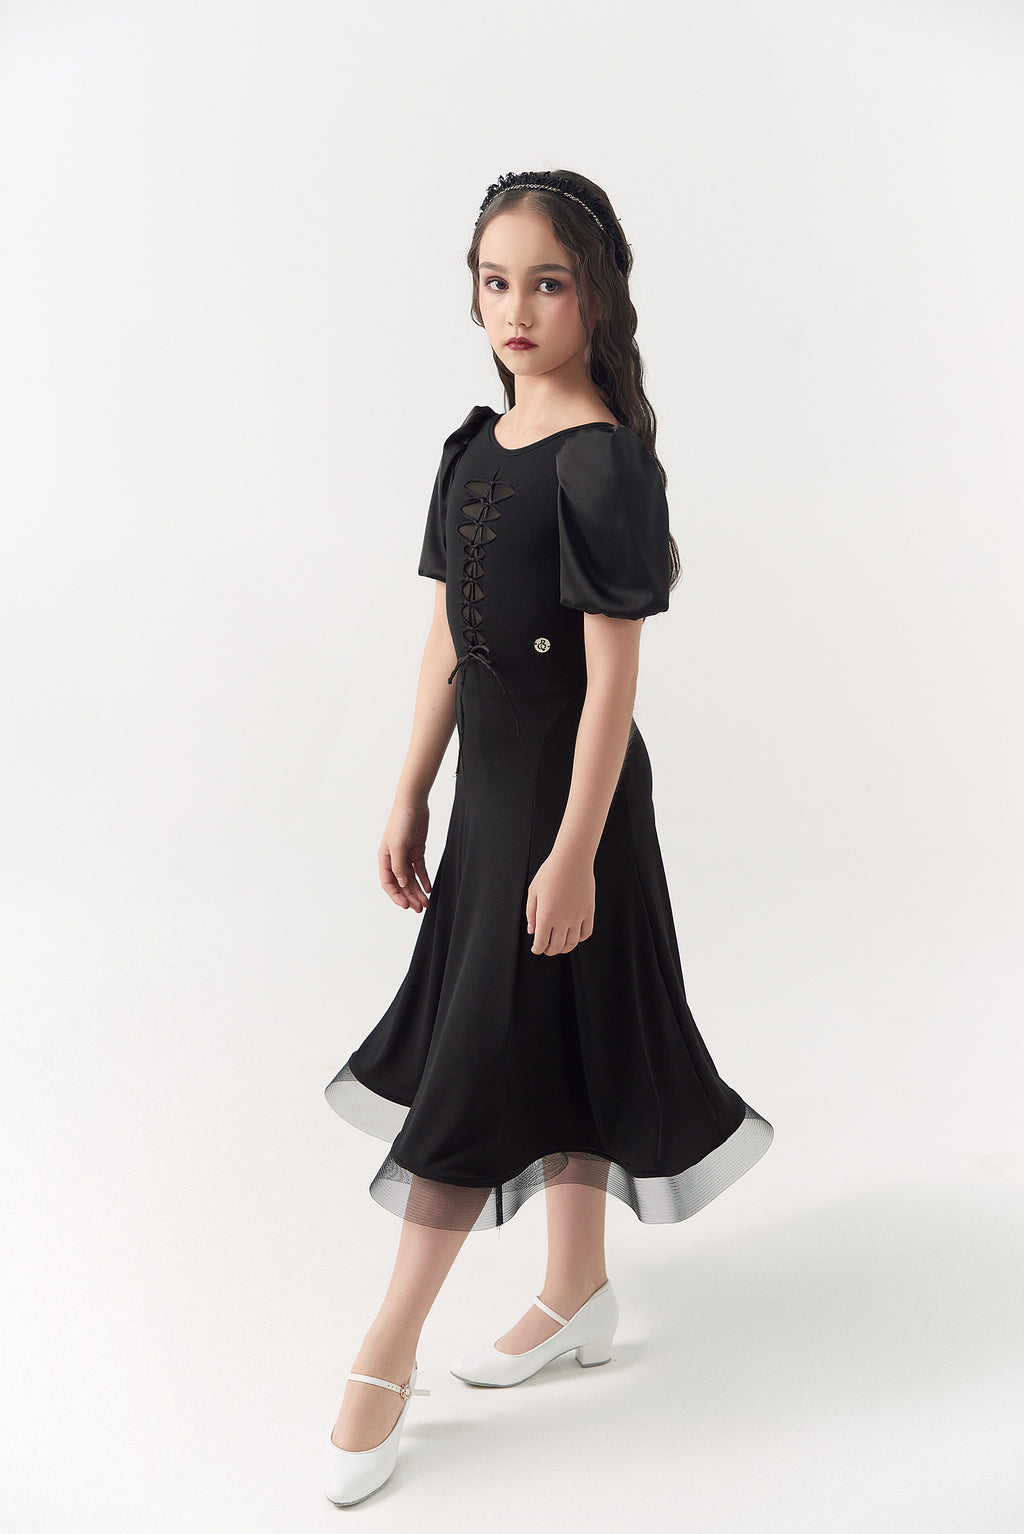 DQ-2310 Kids High-End Customized Lace-up Dress